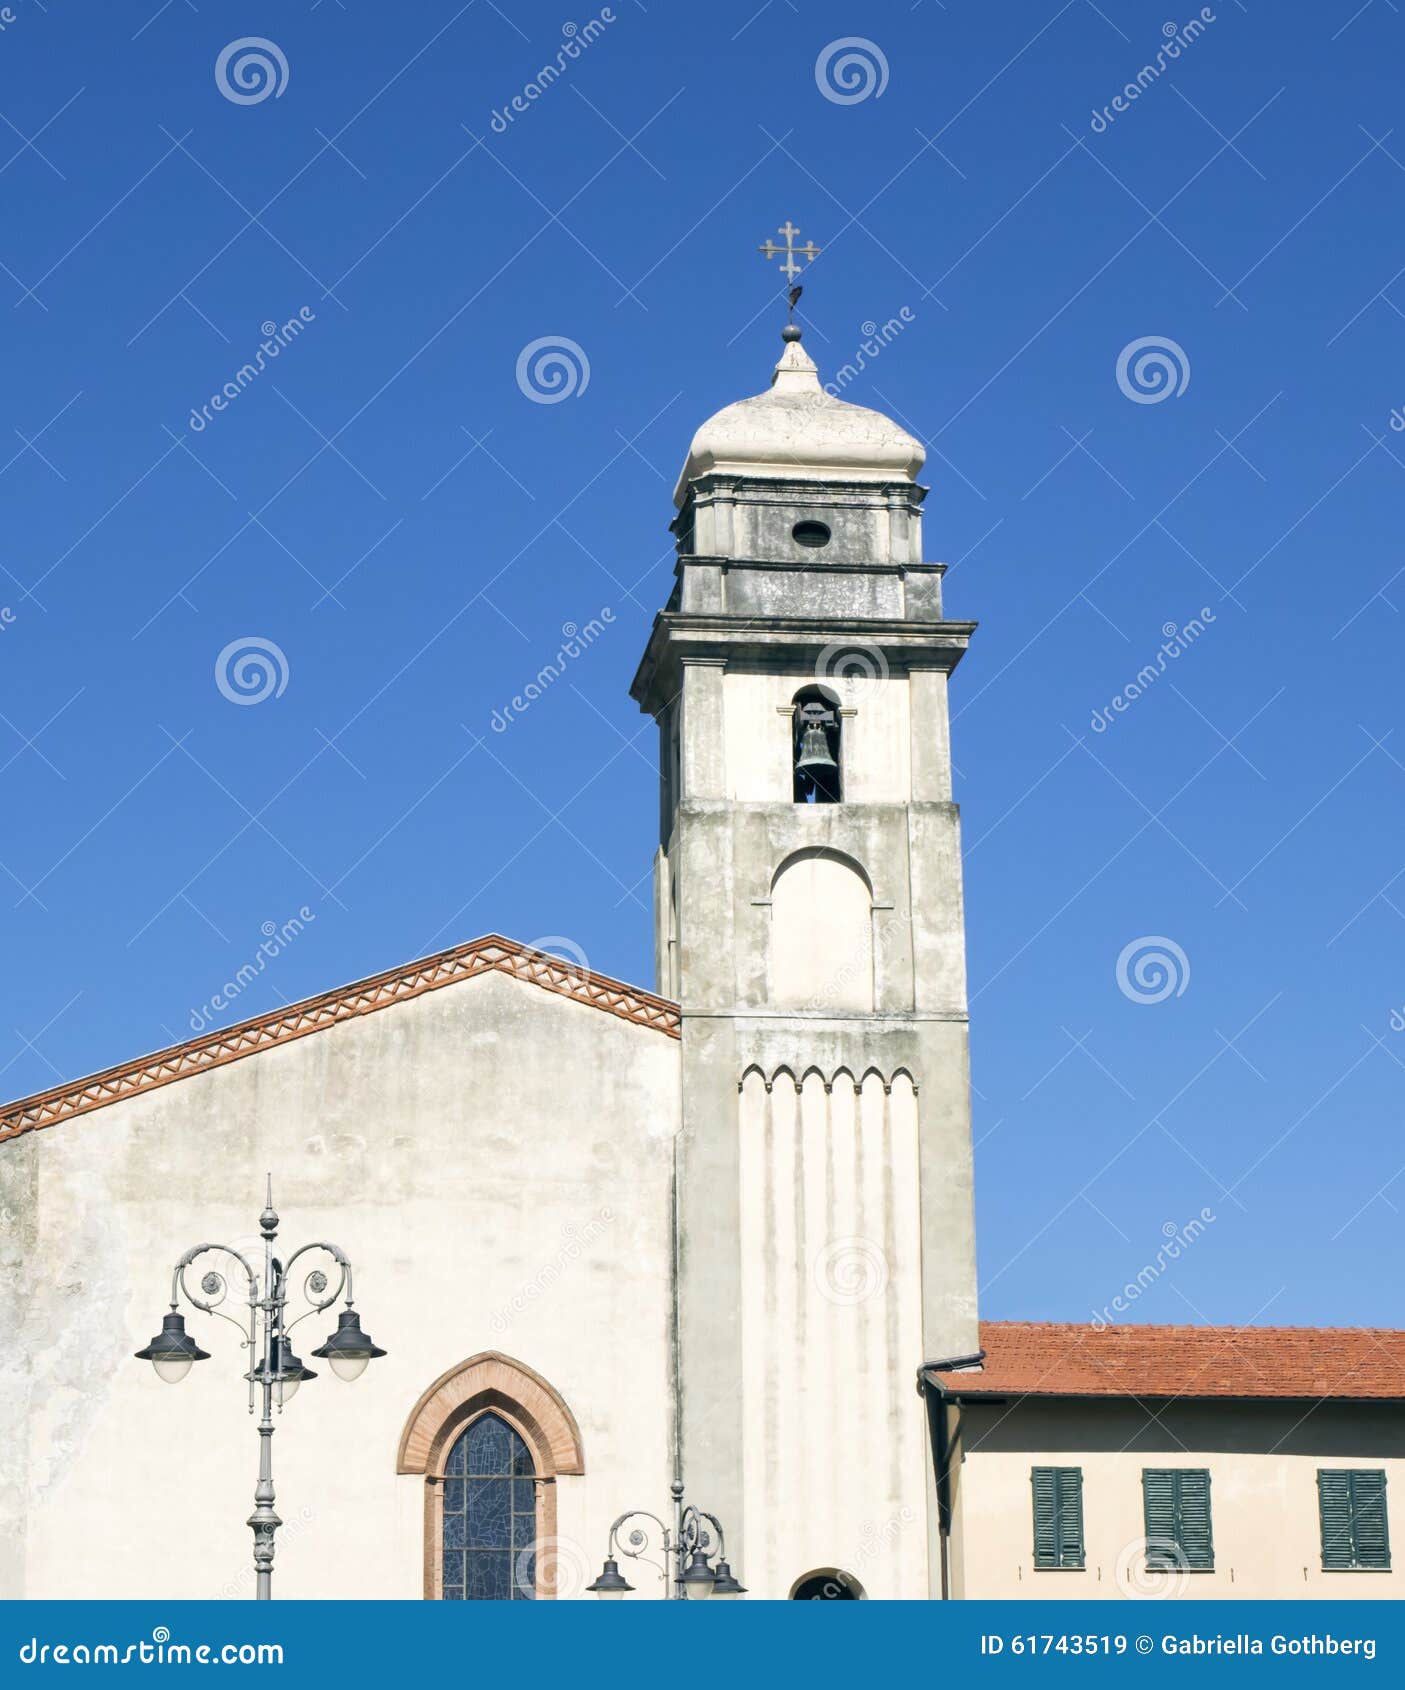 bell tower of christian church, in pisa, italy.